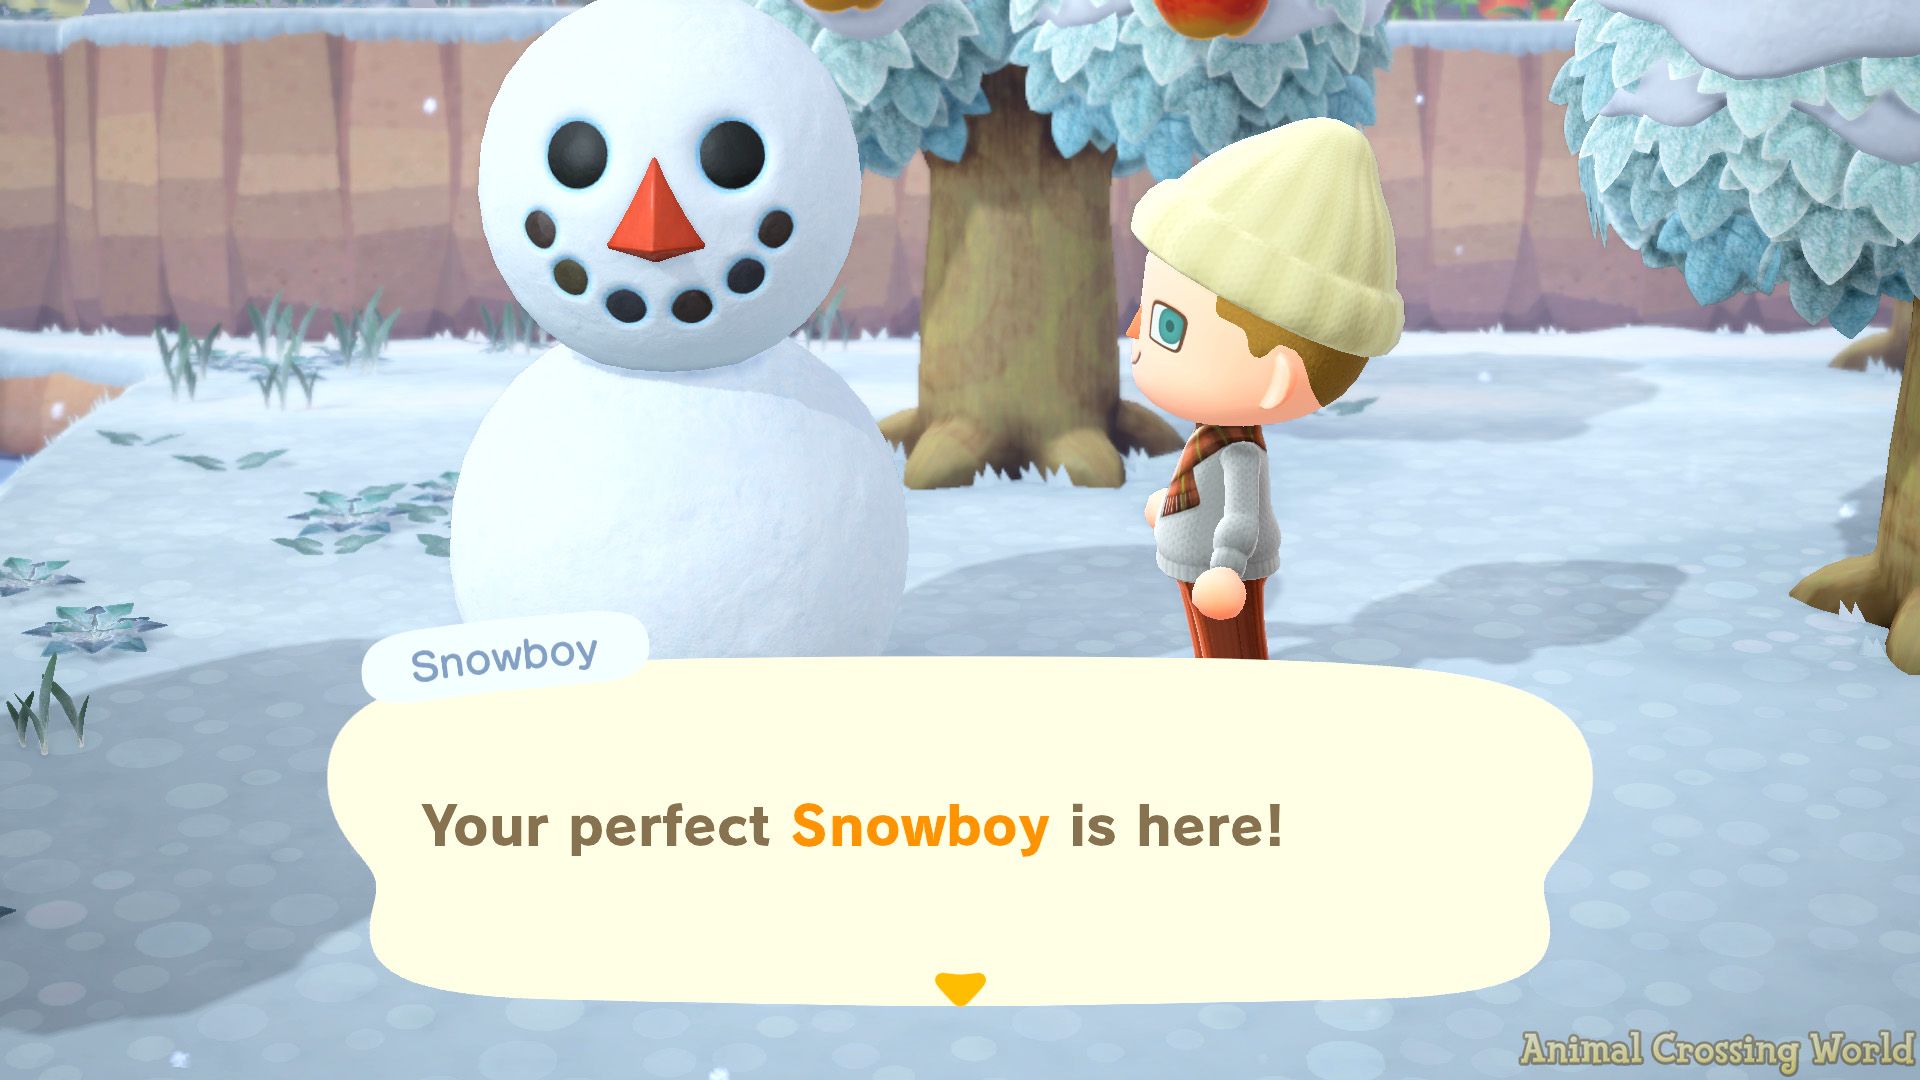 Animal Crossing World 🐦☕ on Twitter: "How&#14;s your Snowboy